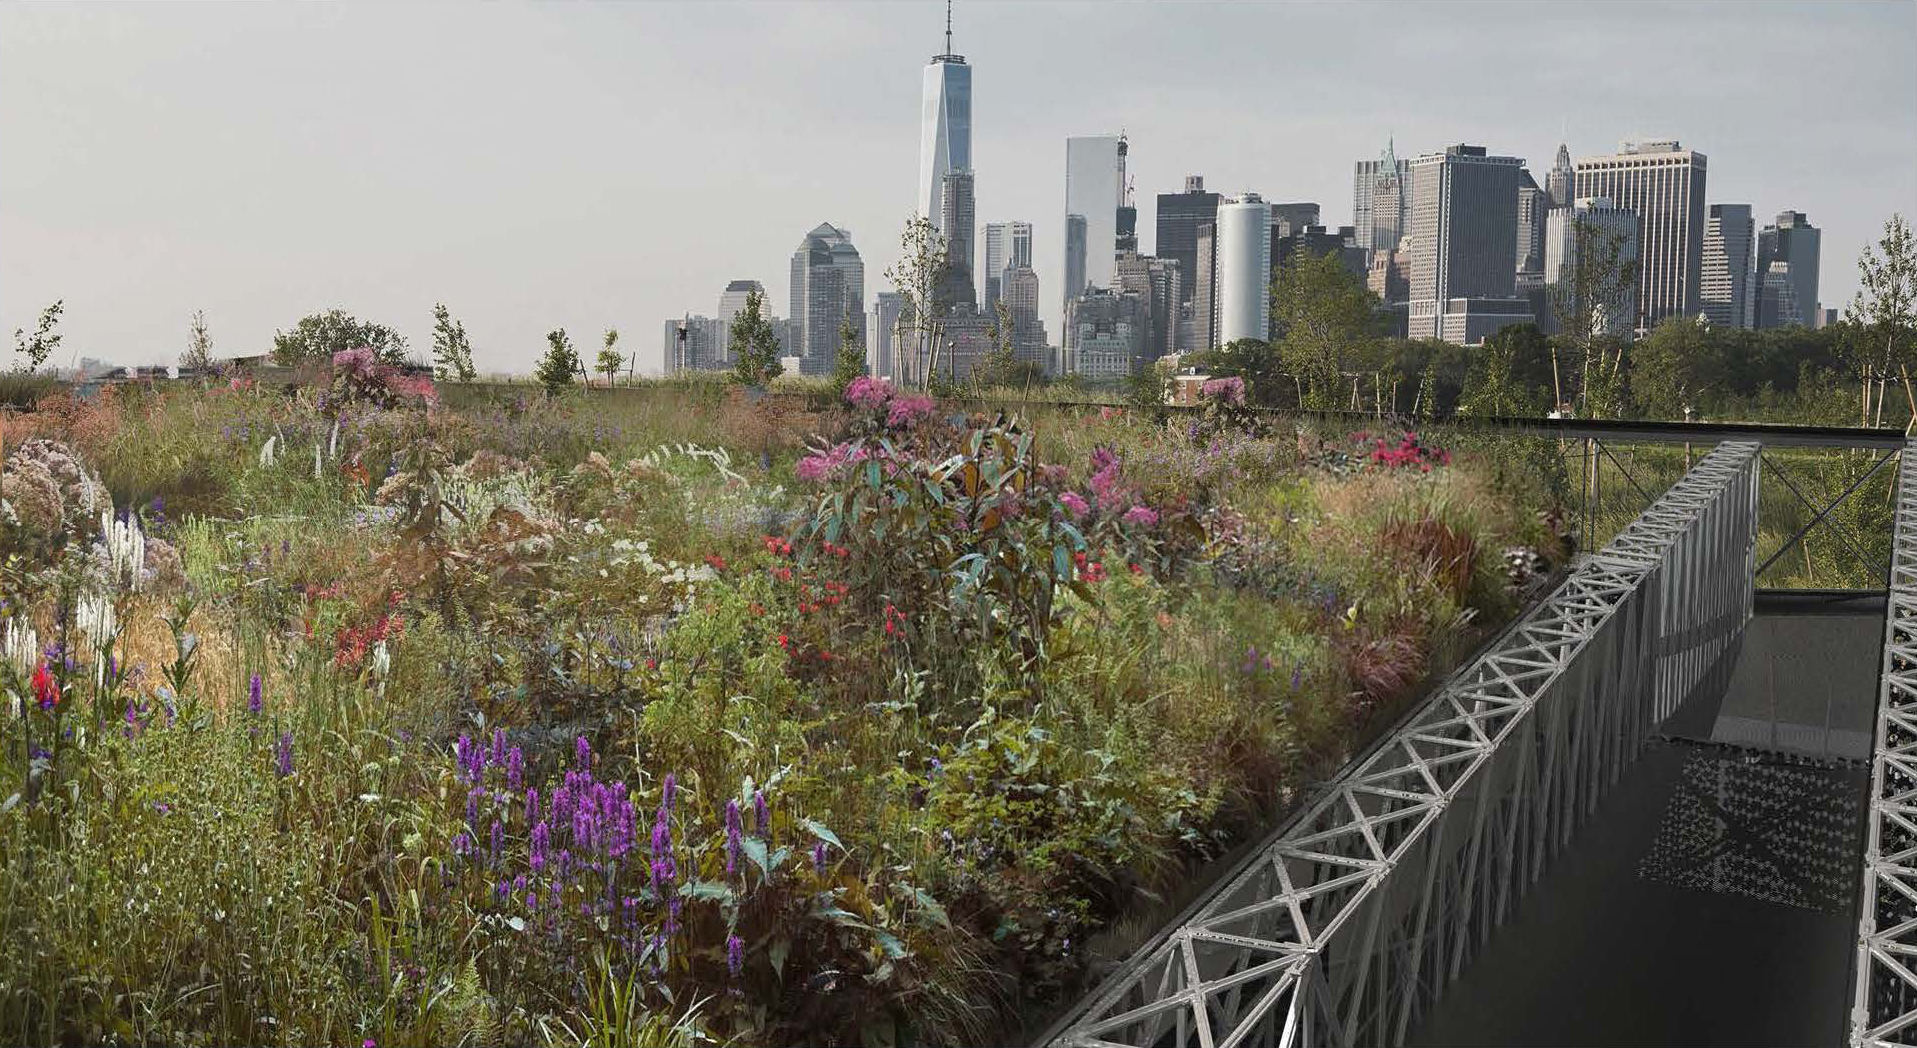 An image of the New York City Downtown skyline from an urban park with paths surrounded by foliage.